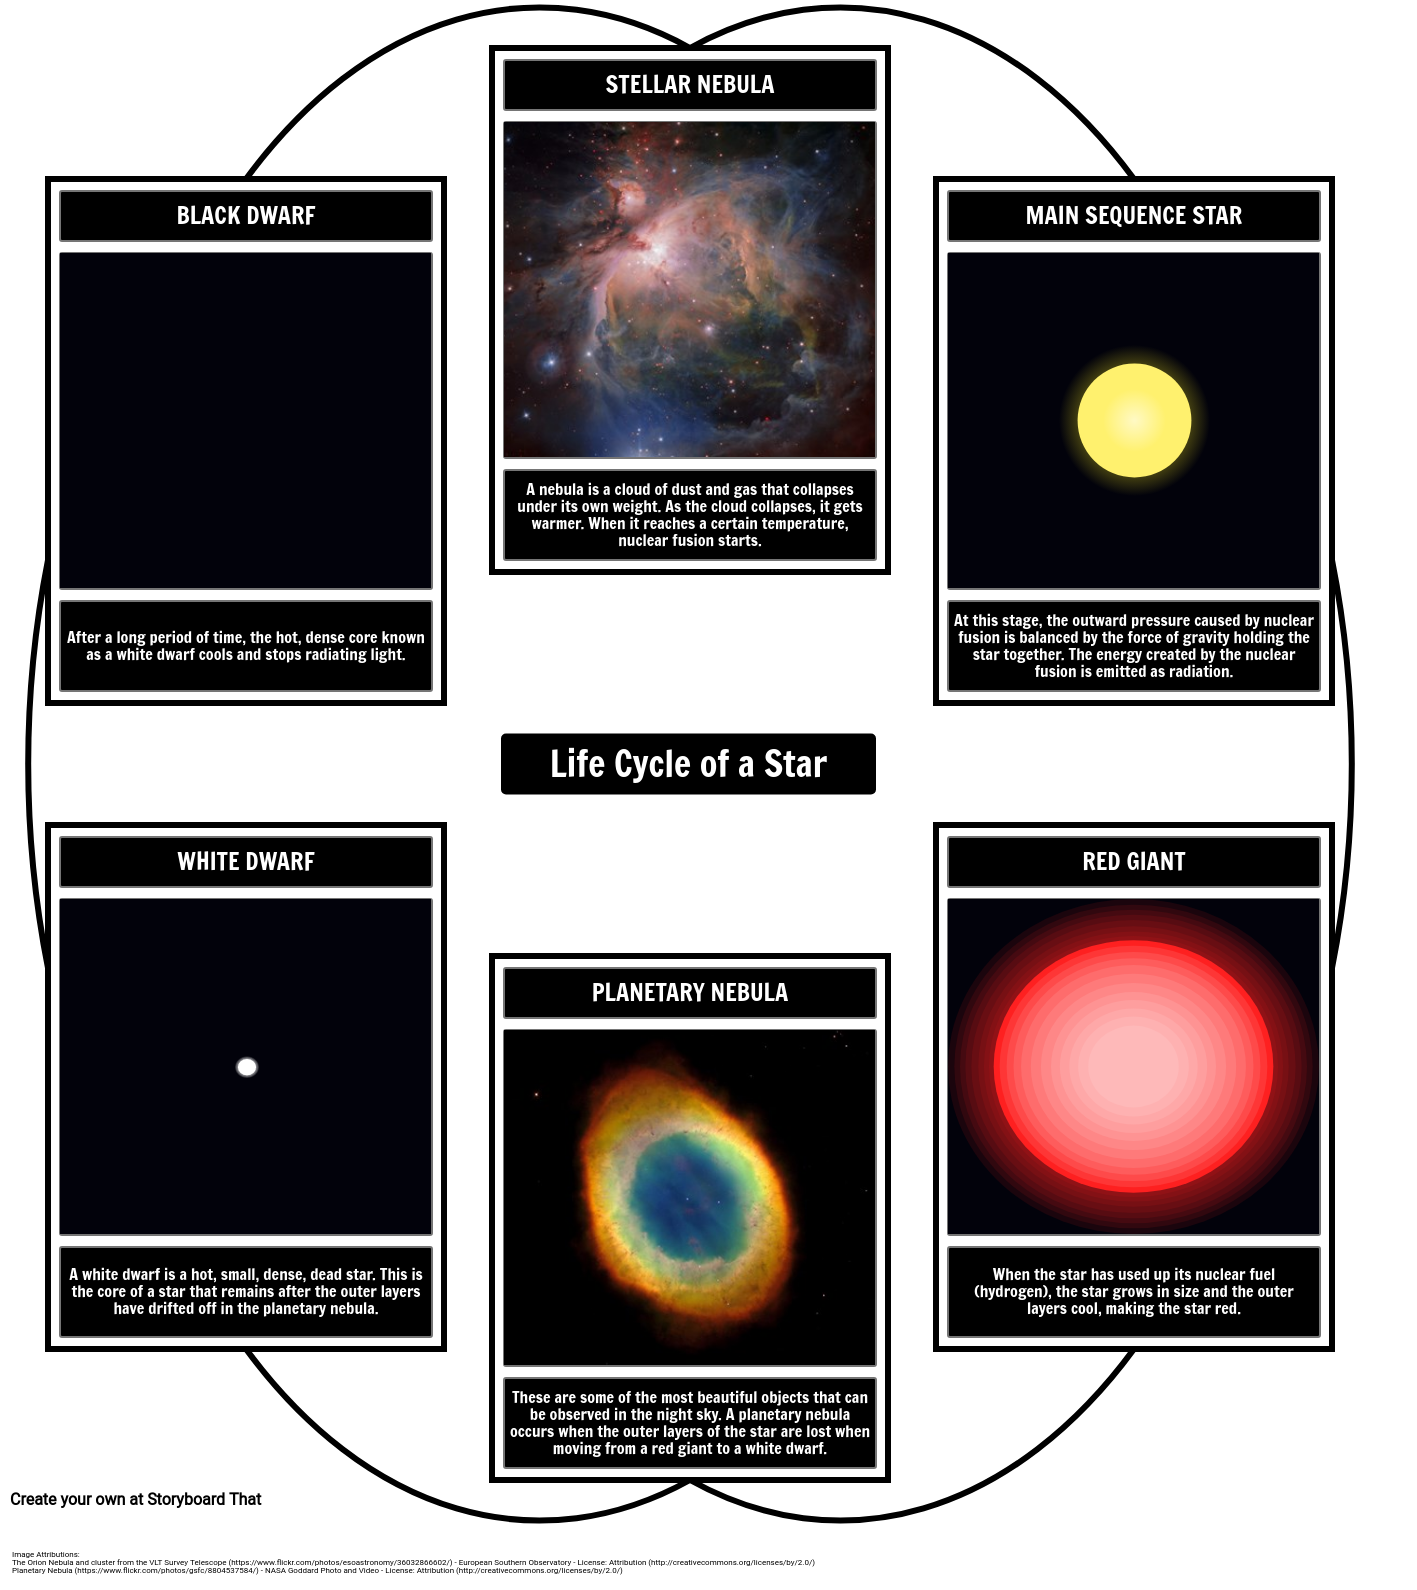 Cycle of the Life of a Star